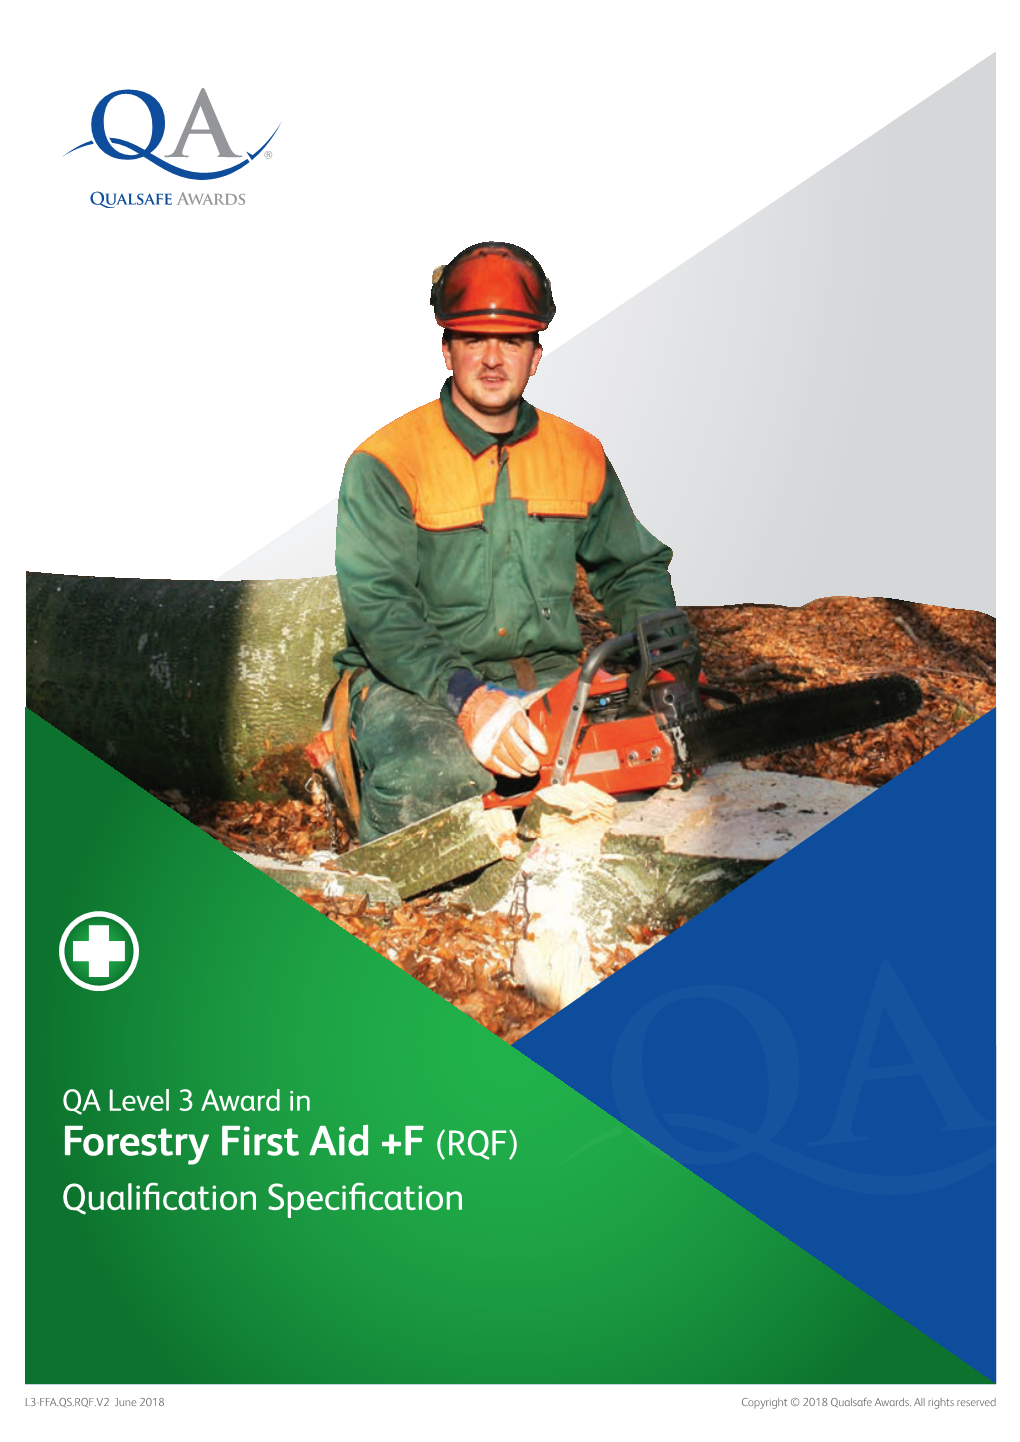 Forestry First Aid +F (RQF) Qualification Specification